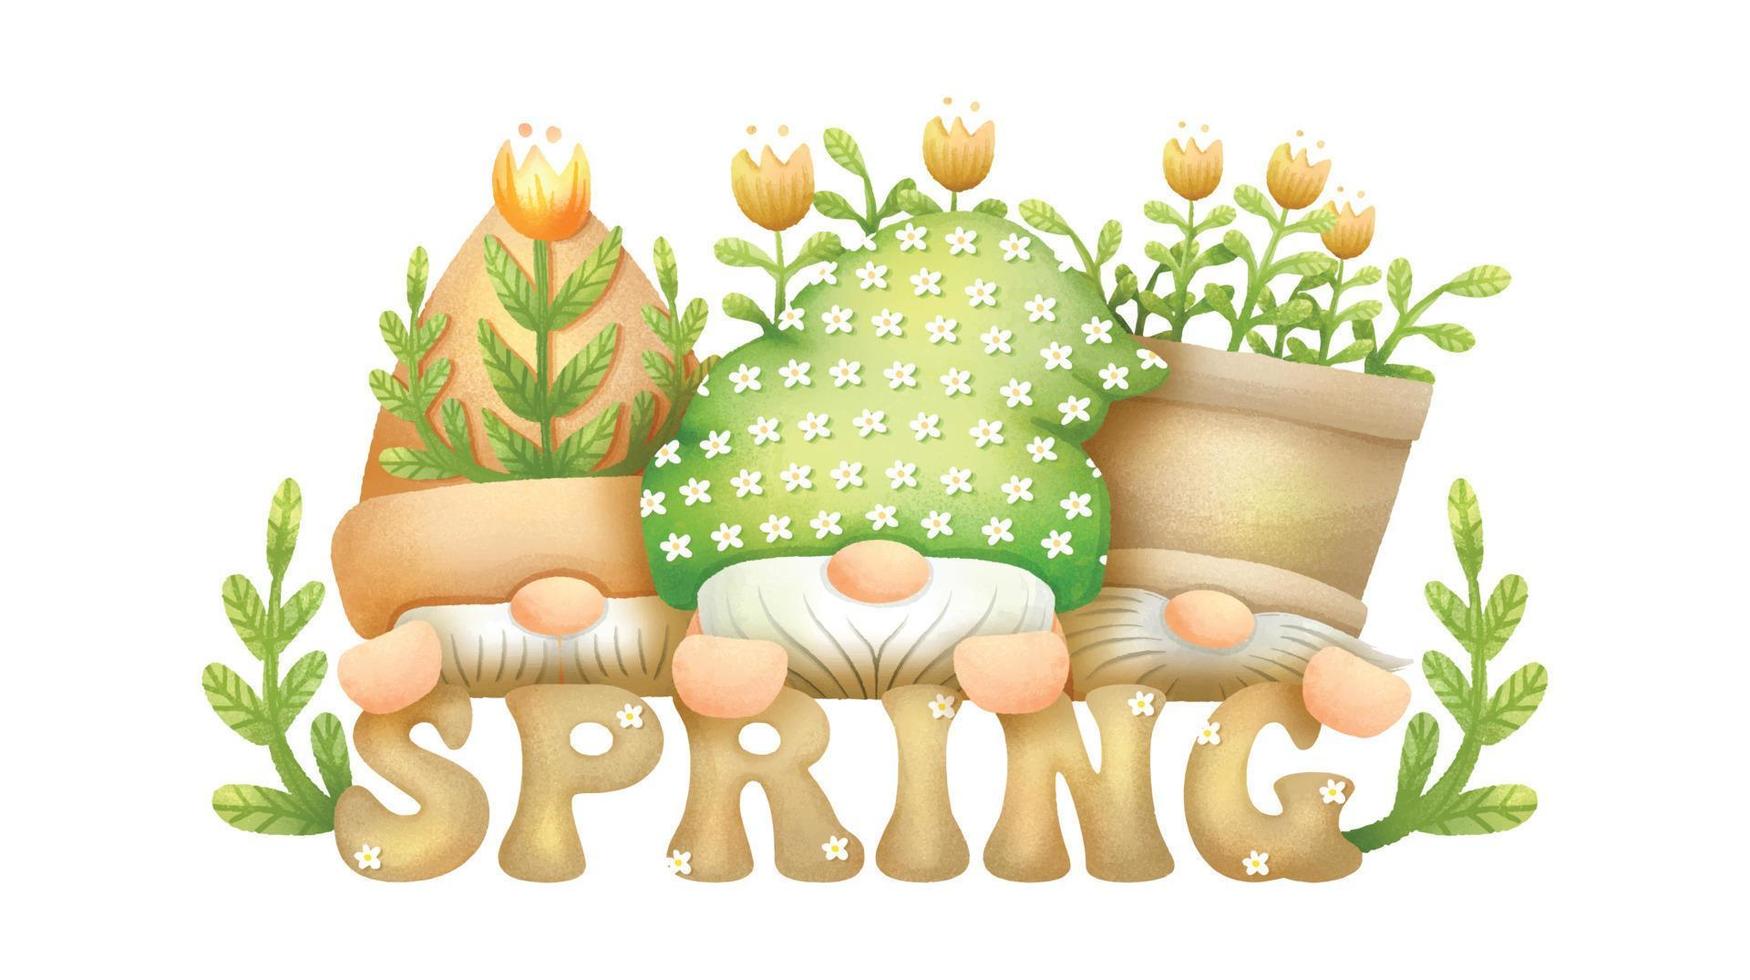 Spring Word Lettering with Gnomes and Flowers Watercolor Composition Graphics 01 vector